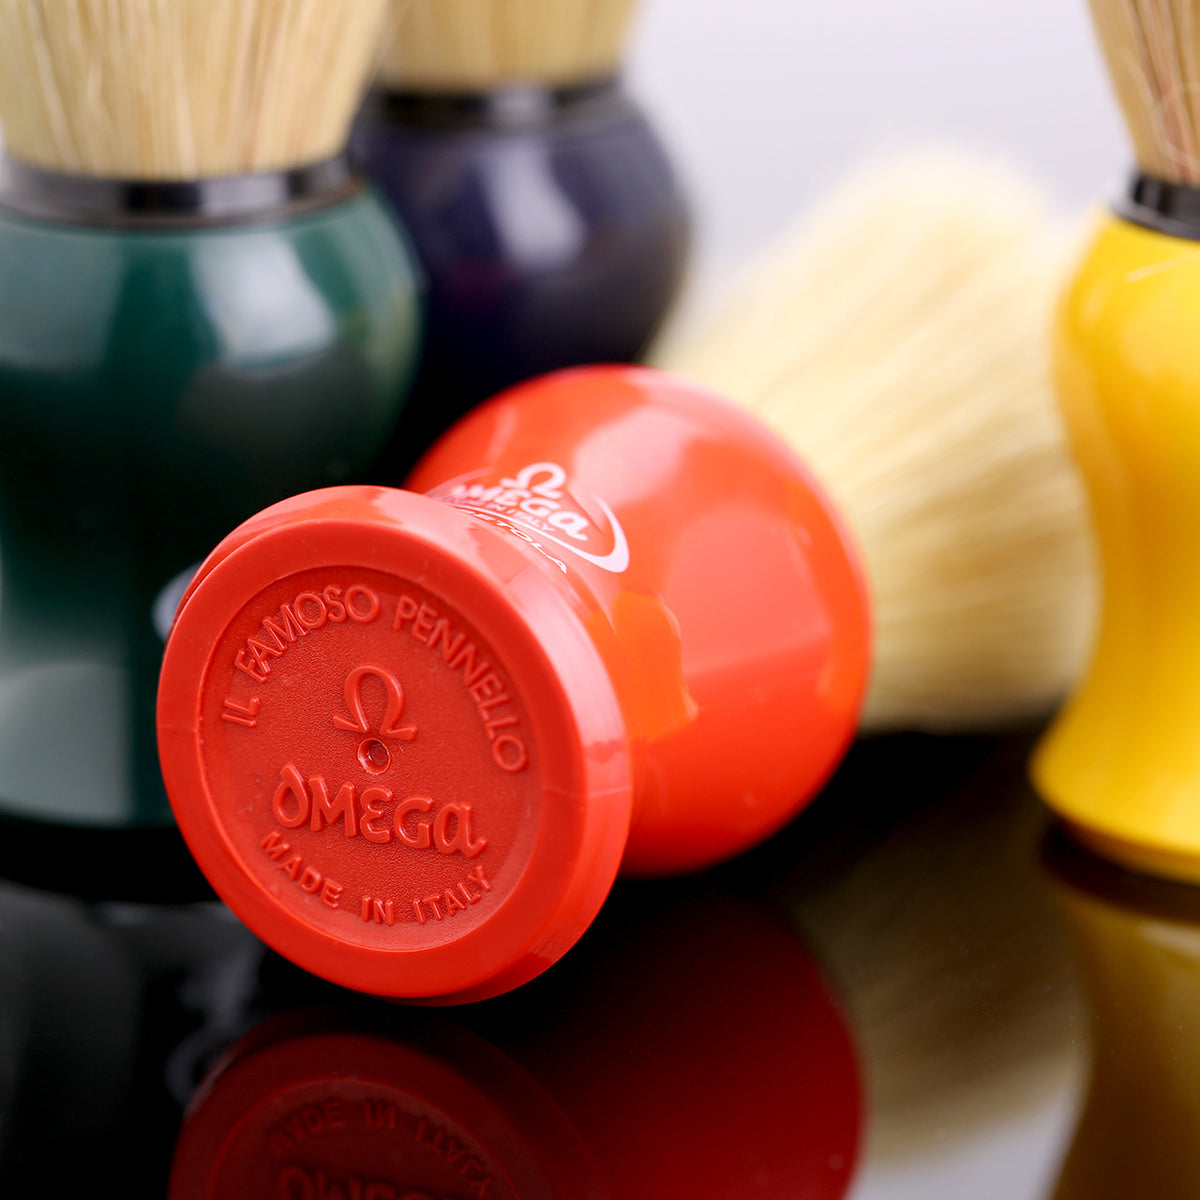 Omega Pure Bristle Shave Brush logo detail on base of the red brush